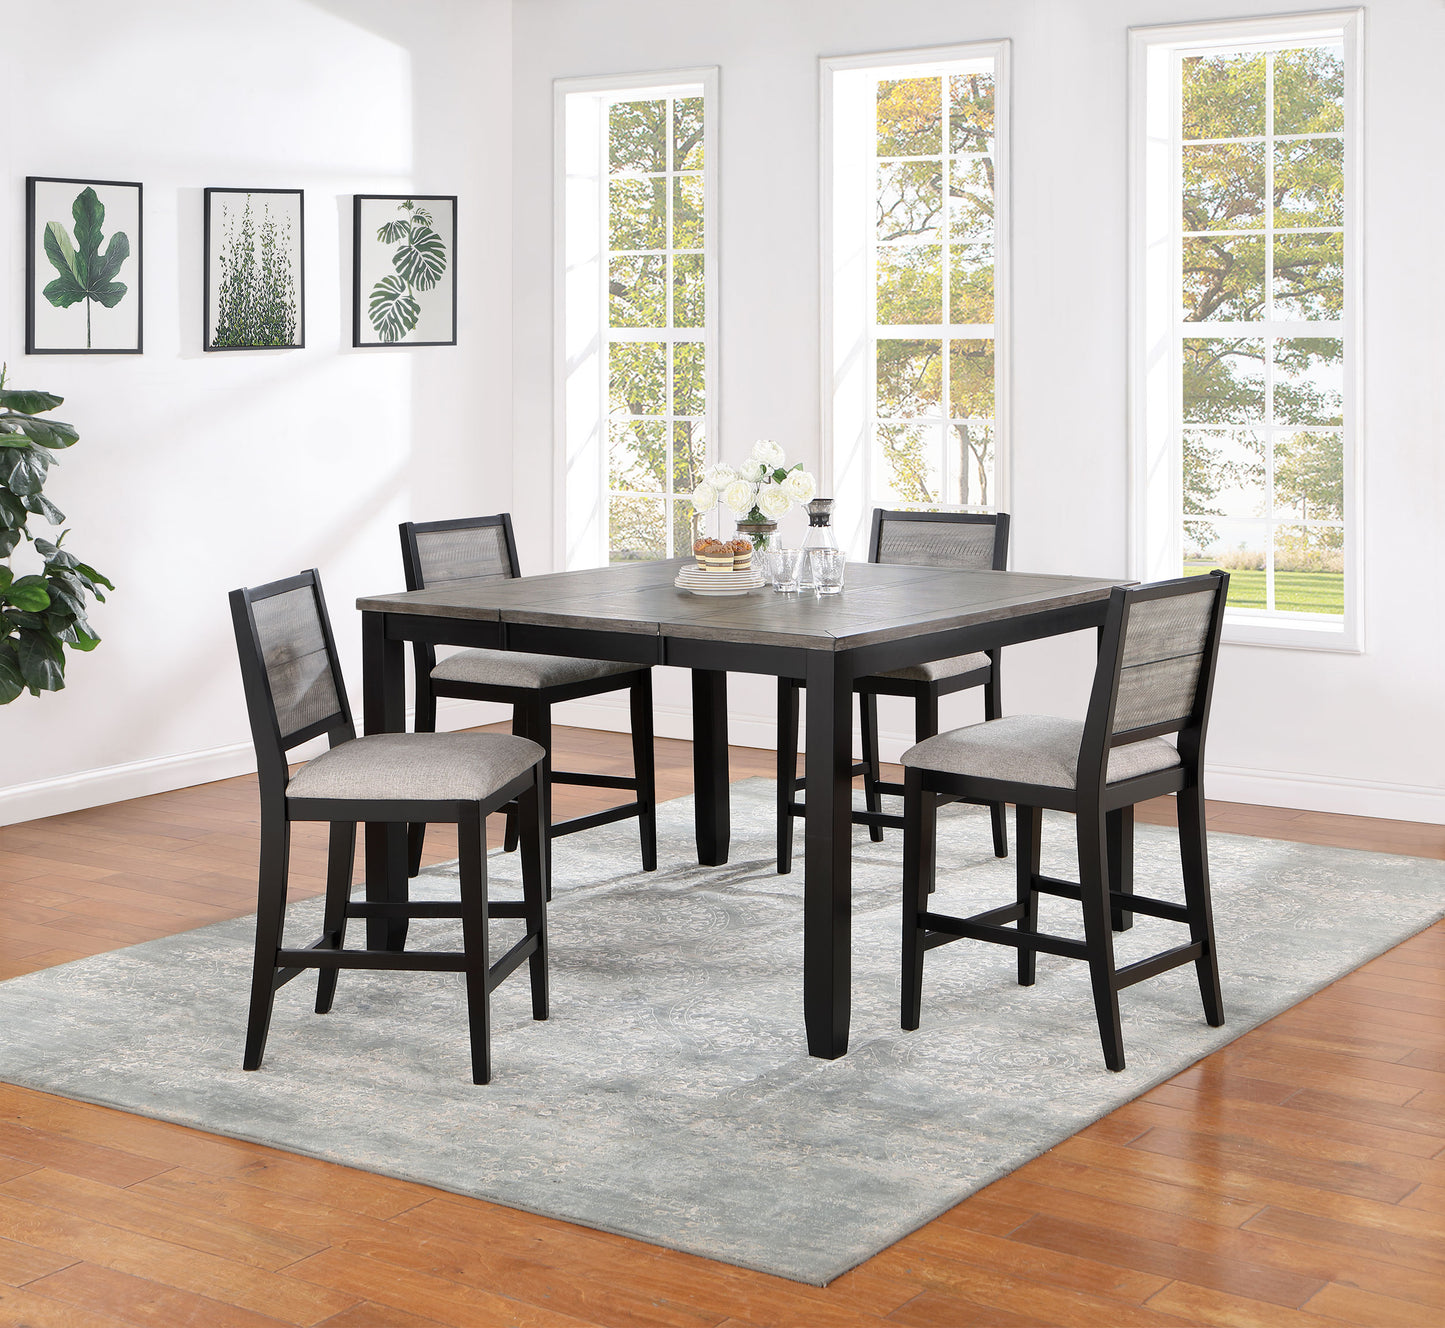 5 pc counter height dining set